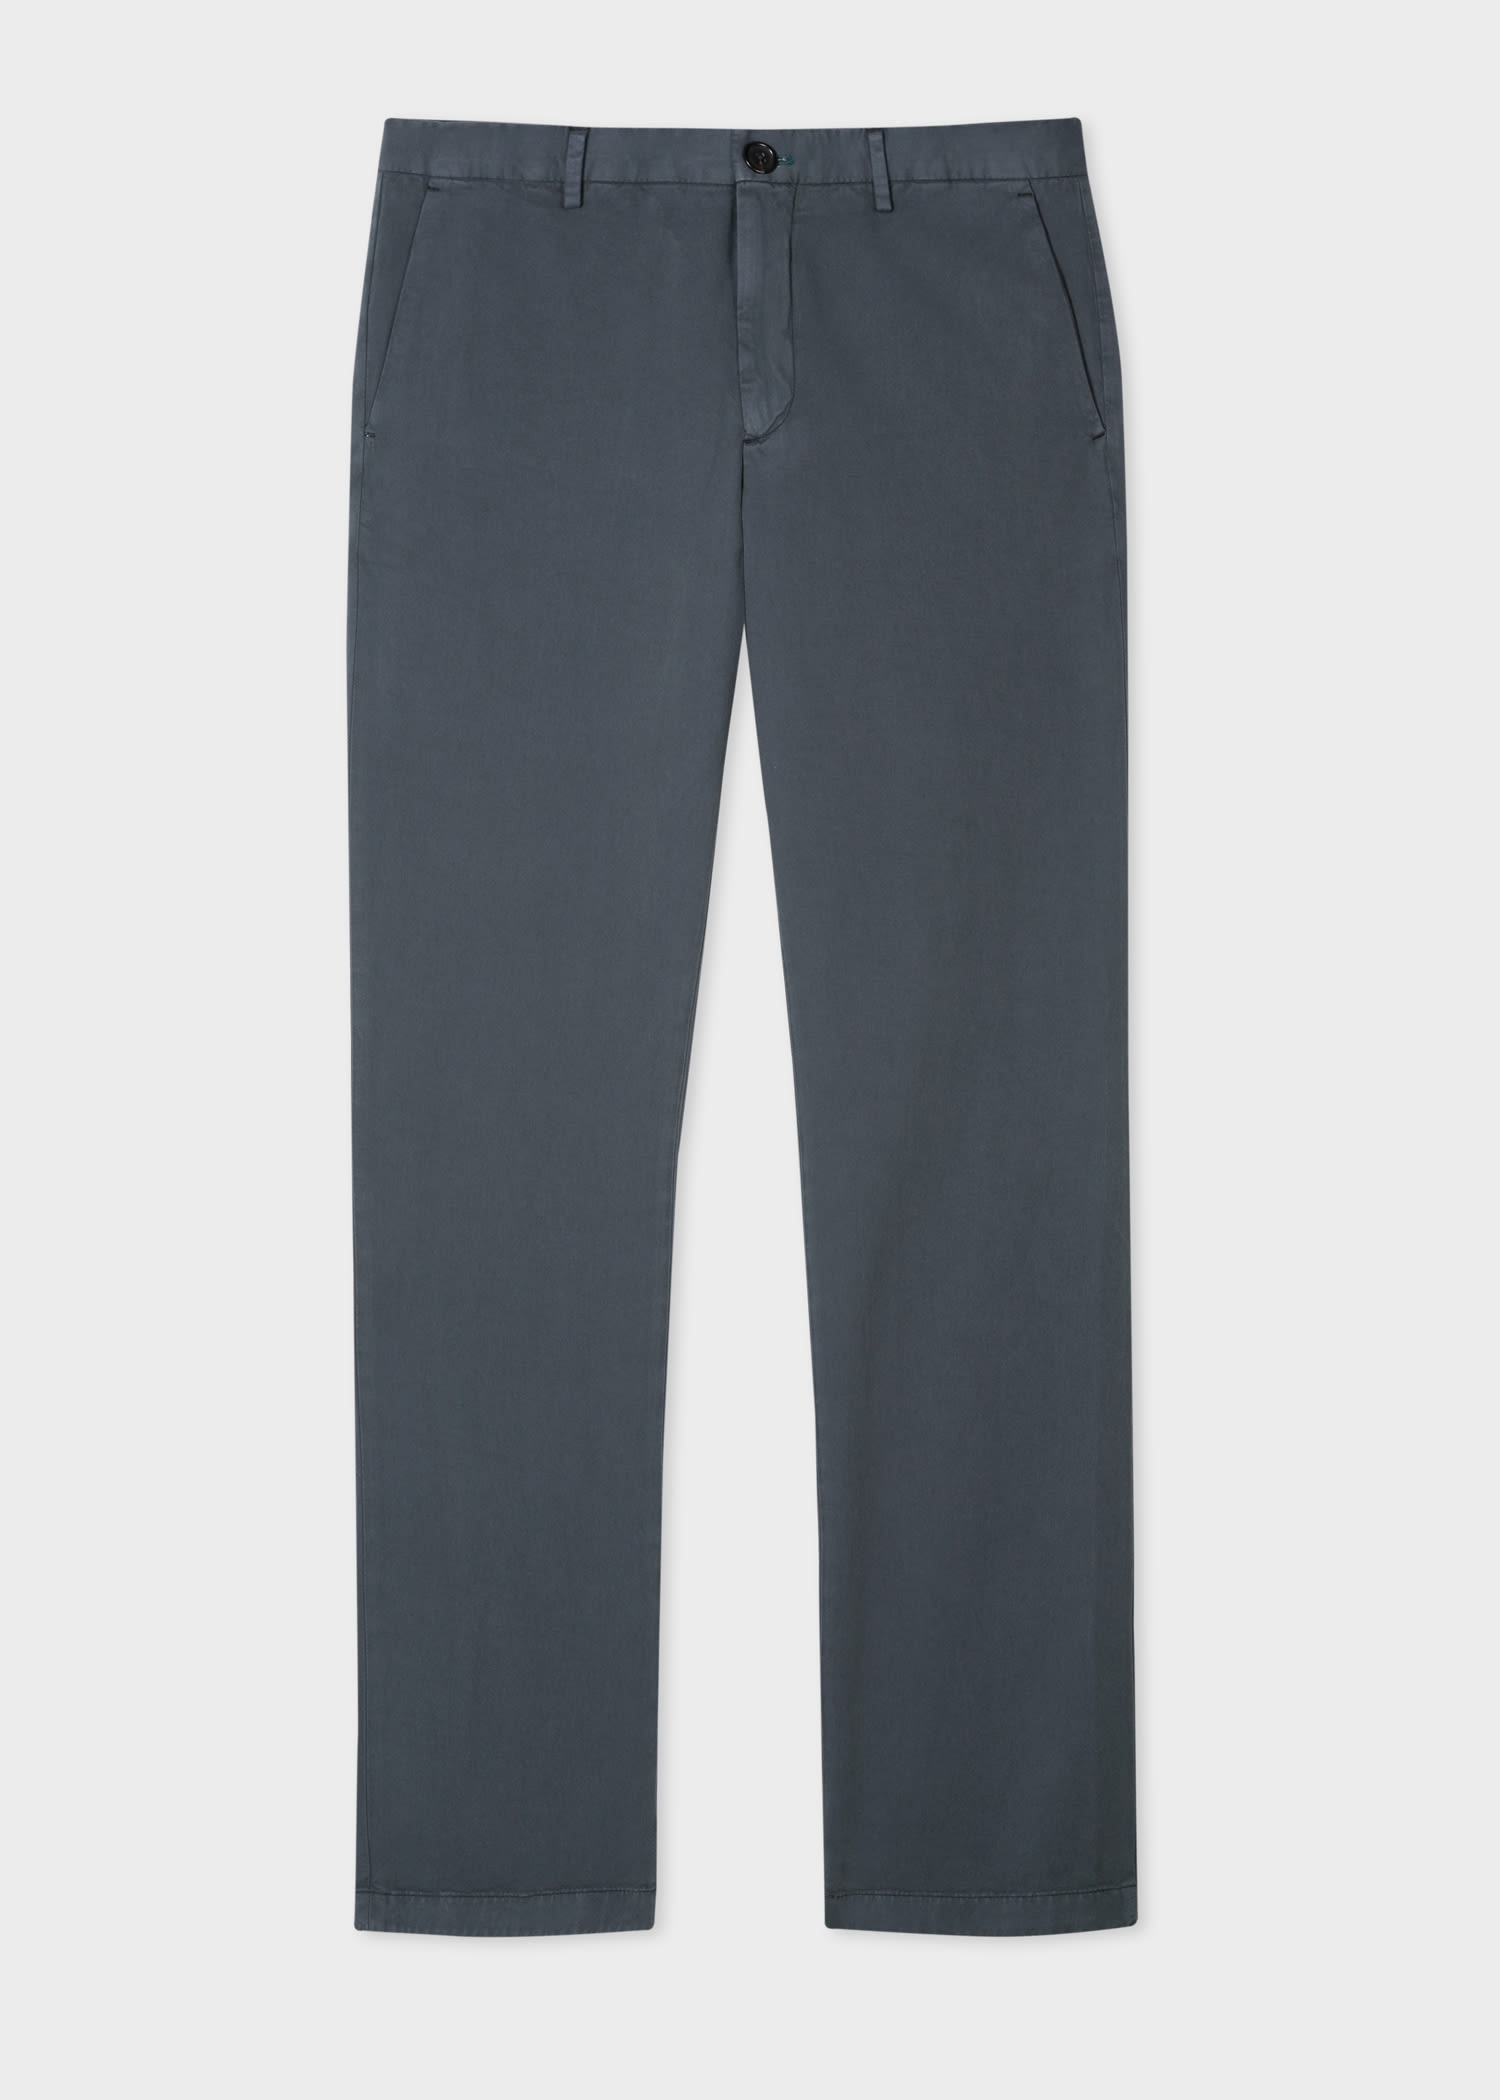 Men's Mid-Fit Slate Grey Stretch-Cotton Chinos